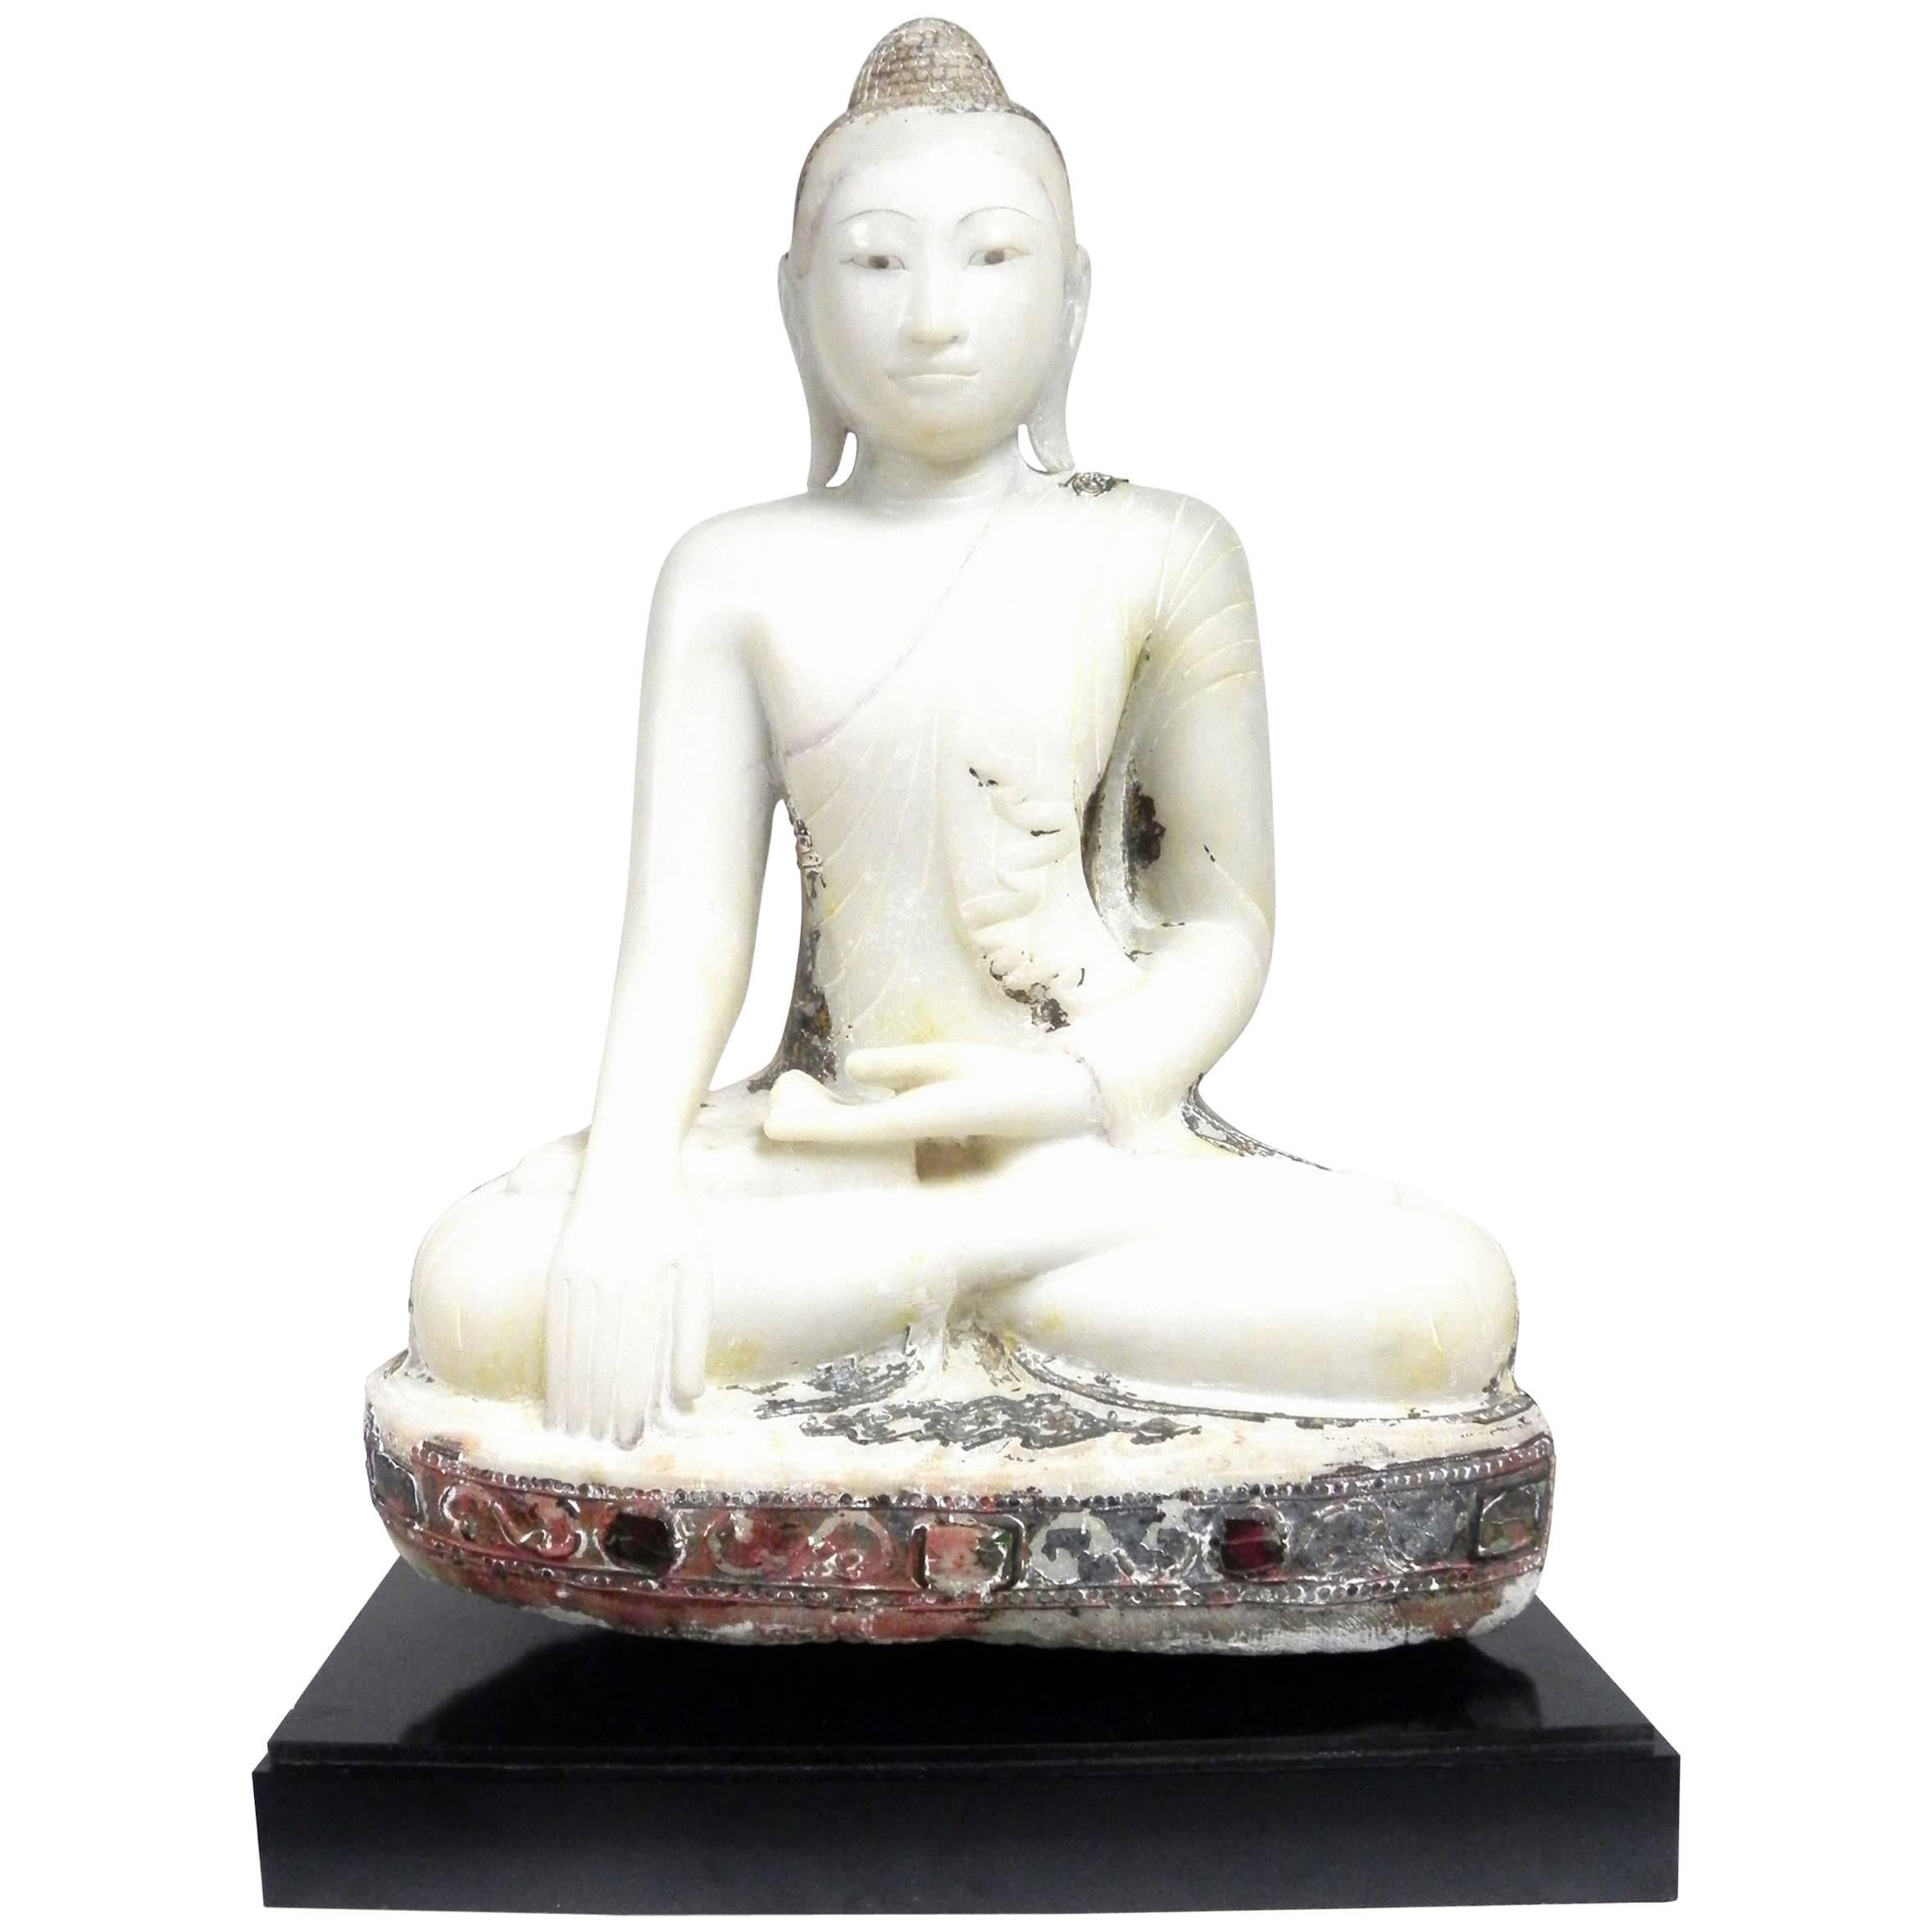 Antique Burmese Marble Seated Buddha Sculpture, Mandalay, Lacquer&Glass Remains